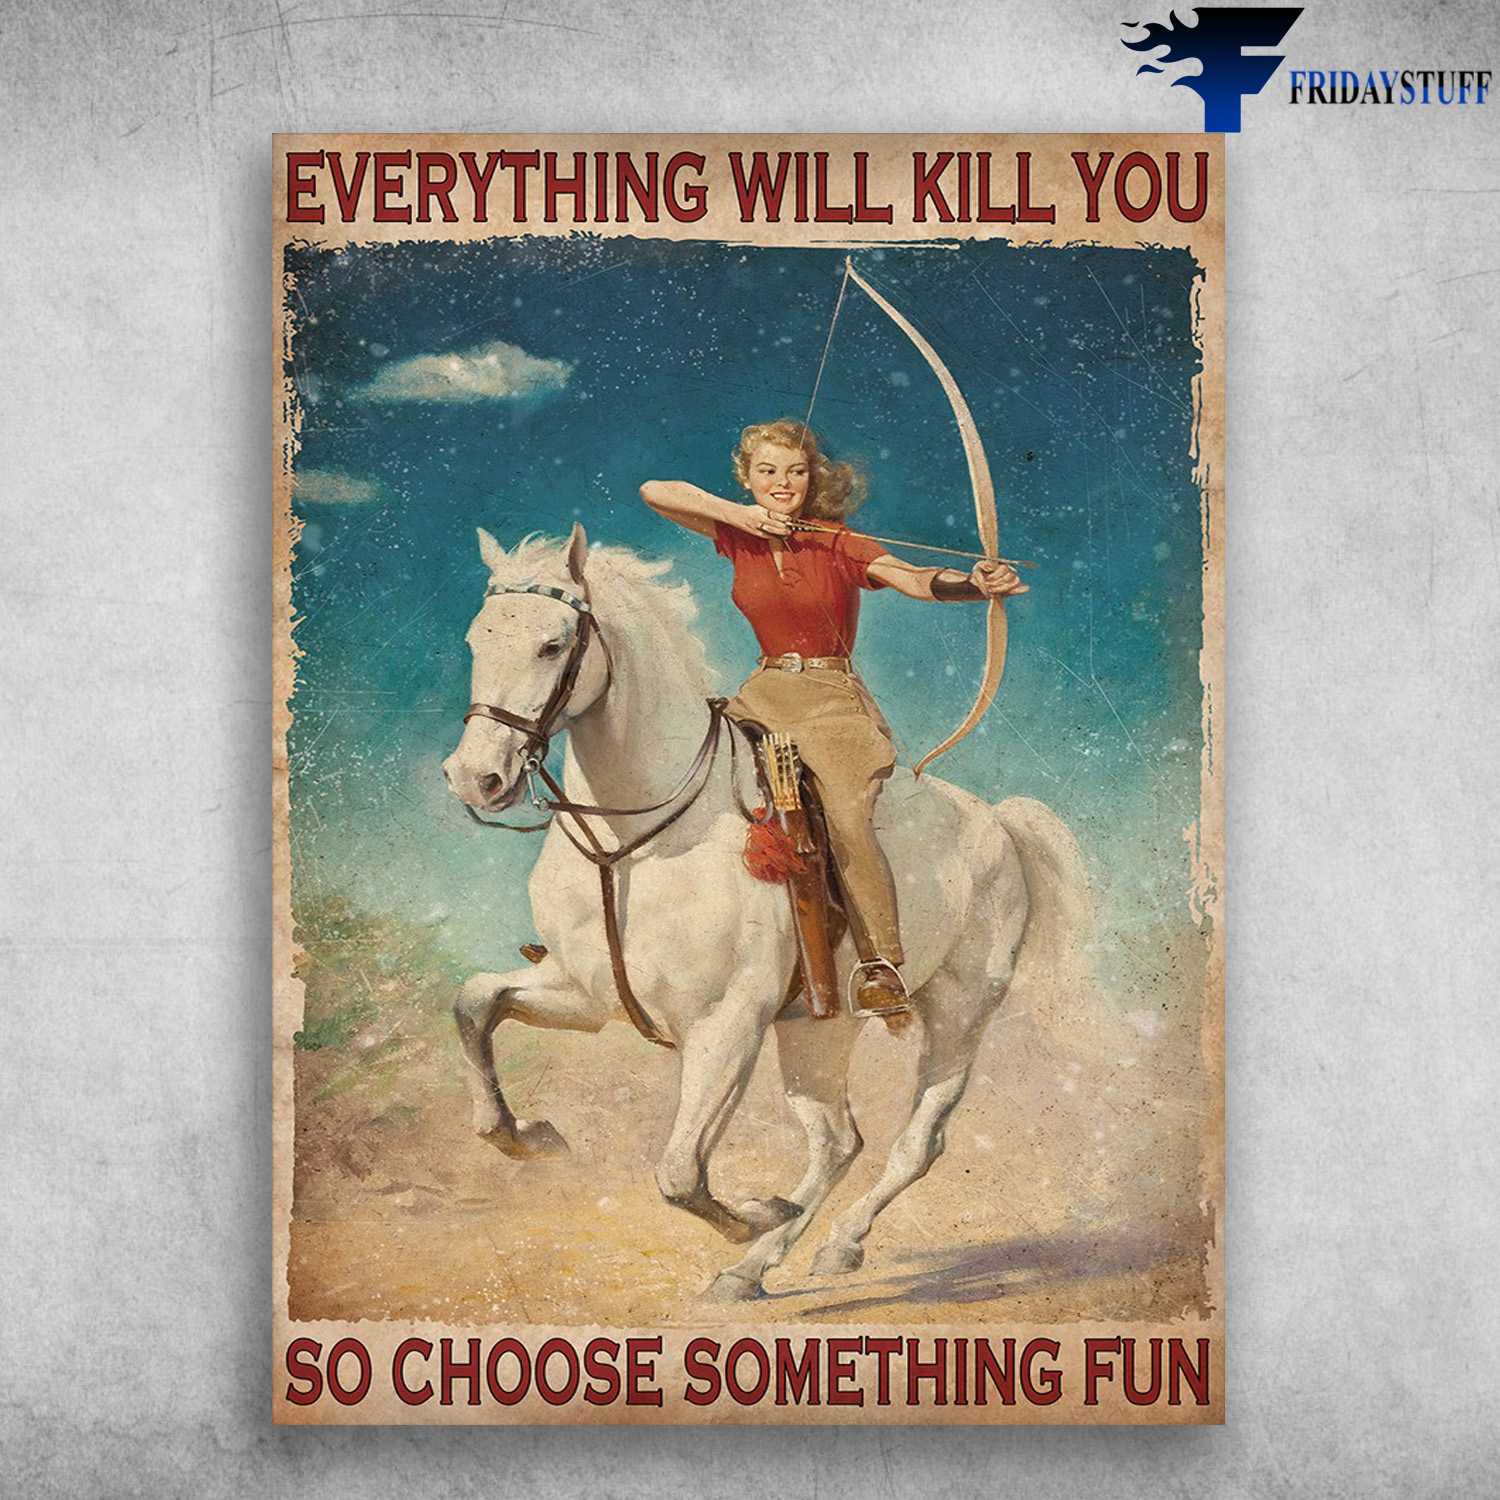 Horse Riding, Archery Poster - Everything Will Kill You, So Choose Something Fun